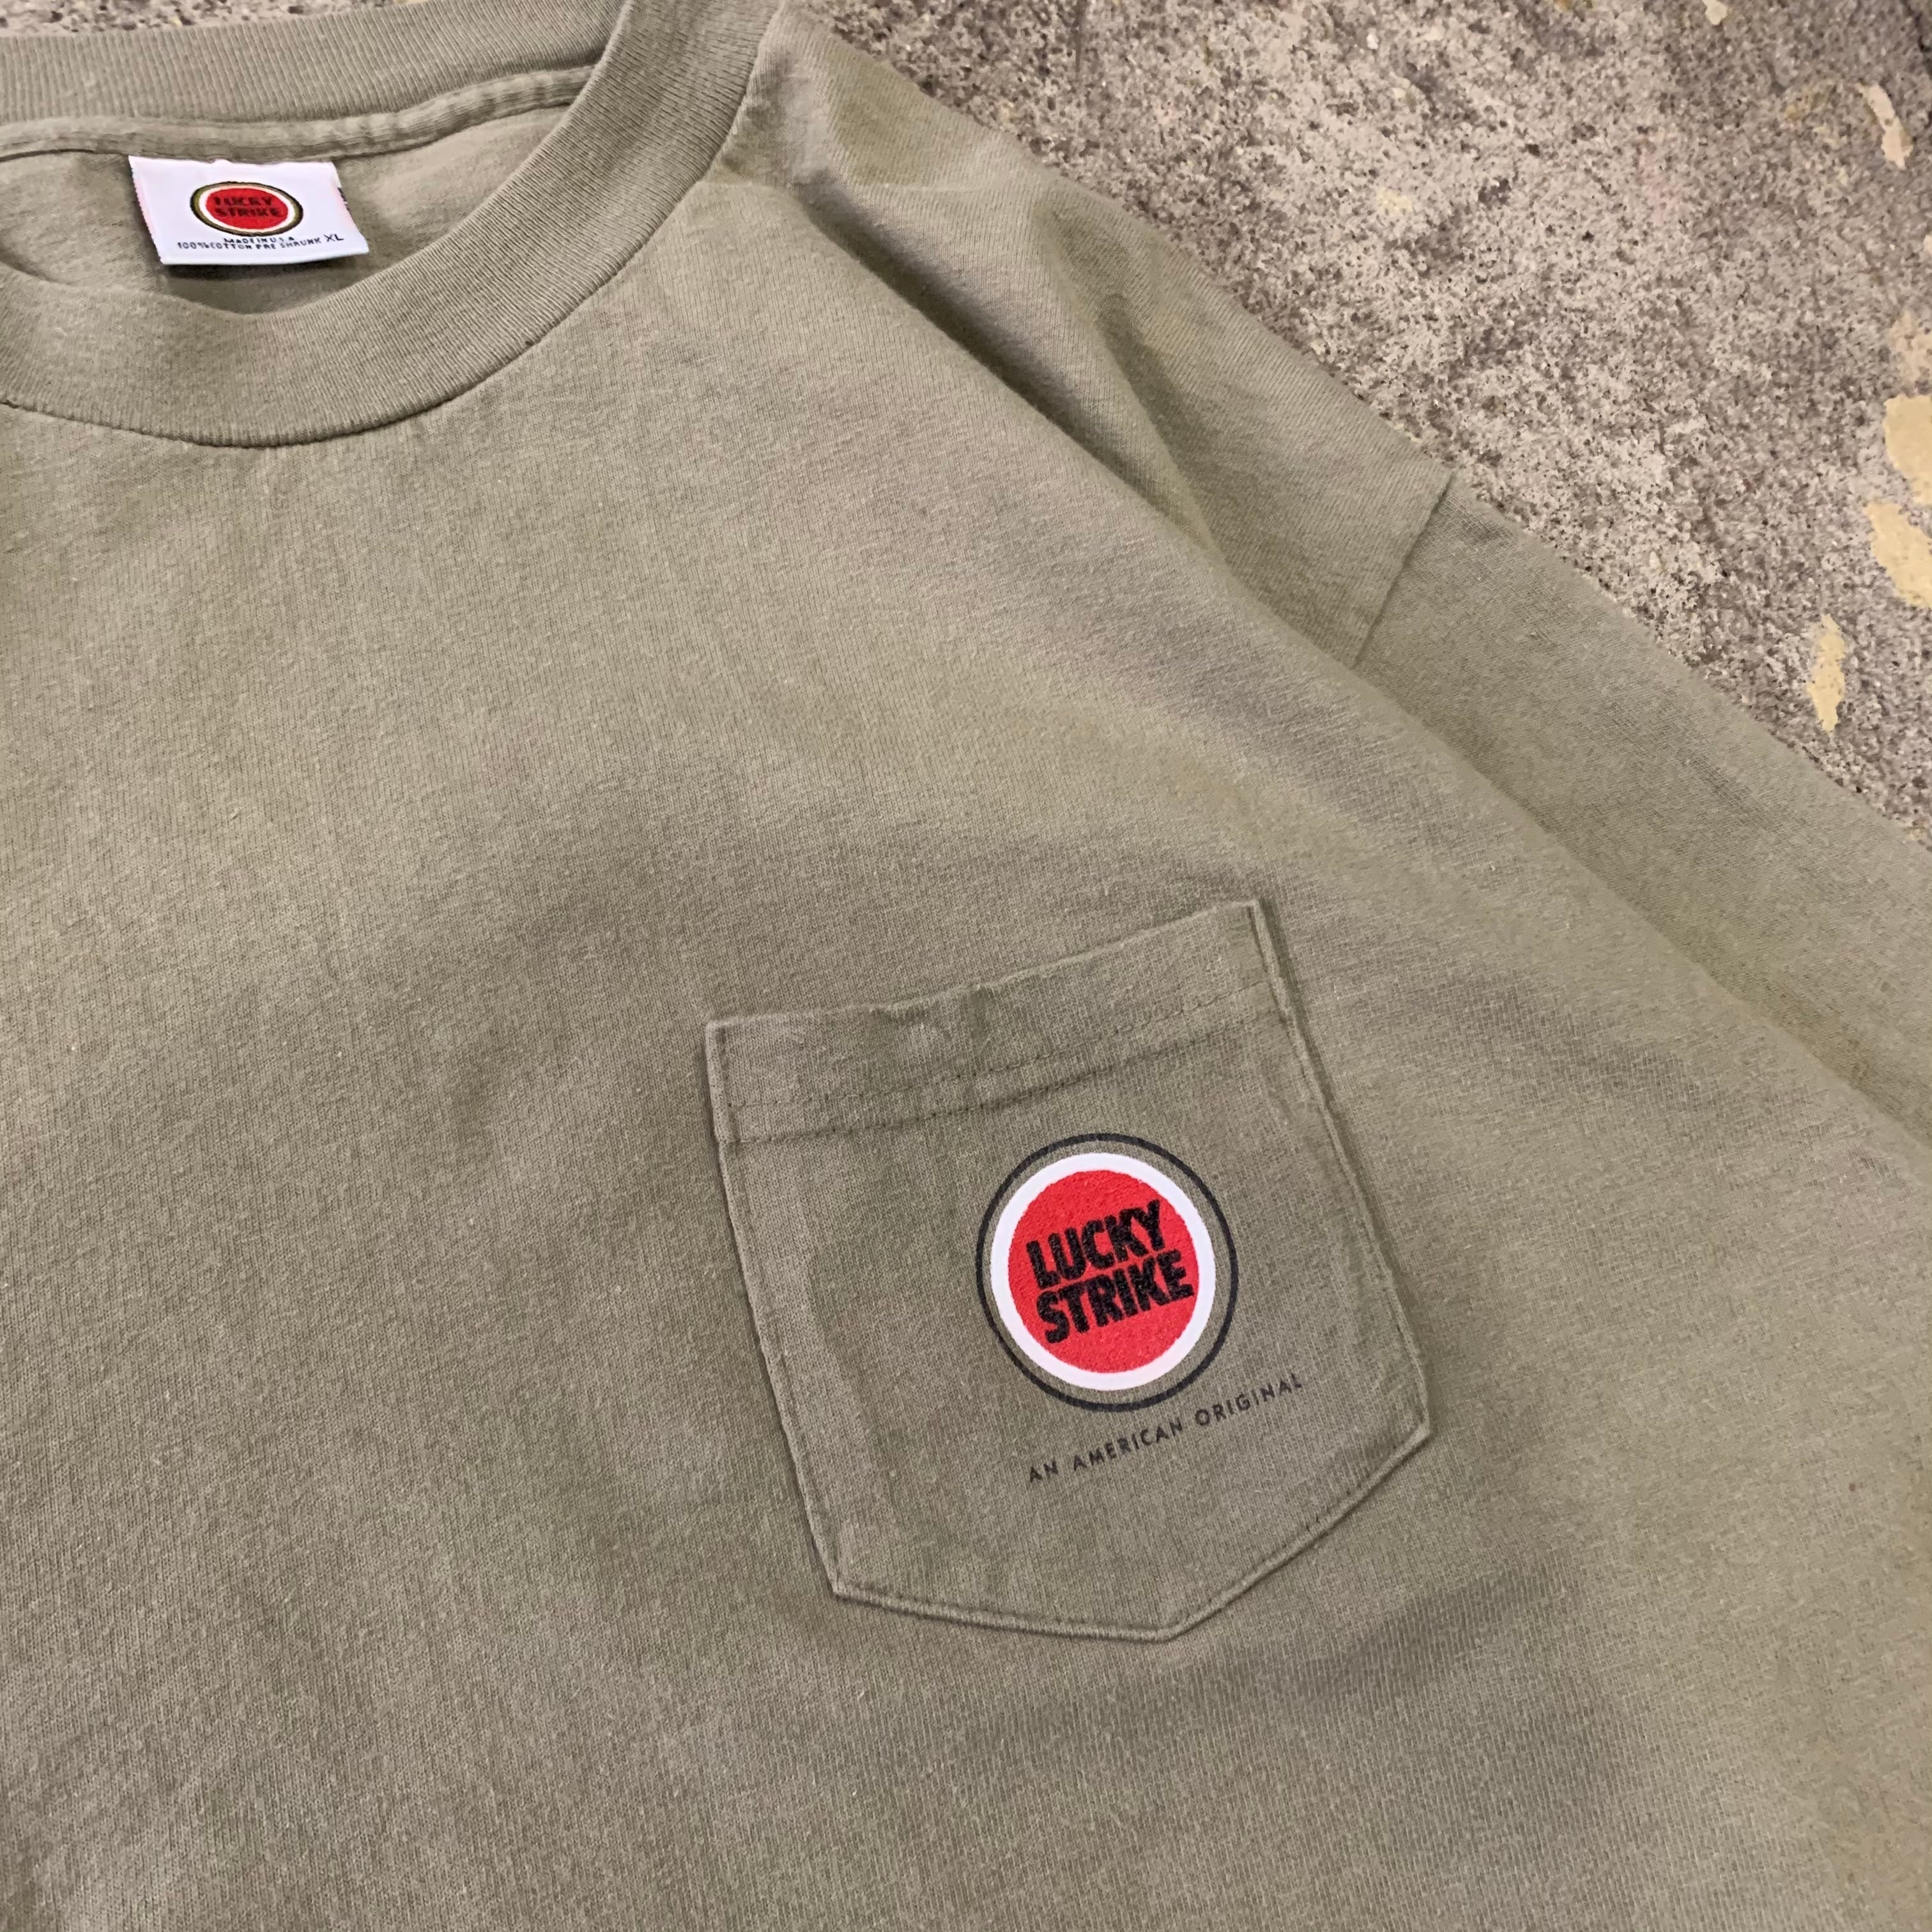 90s LUCKY STRIKE pocket T-shirt | What'z up